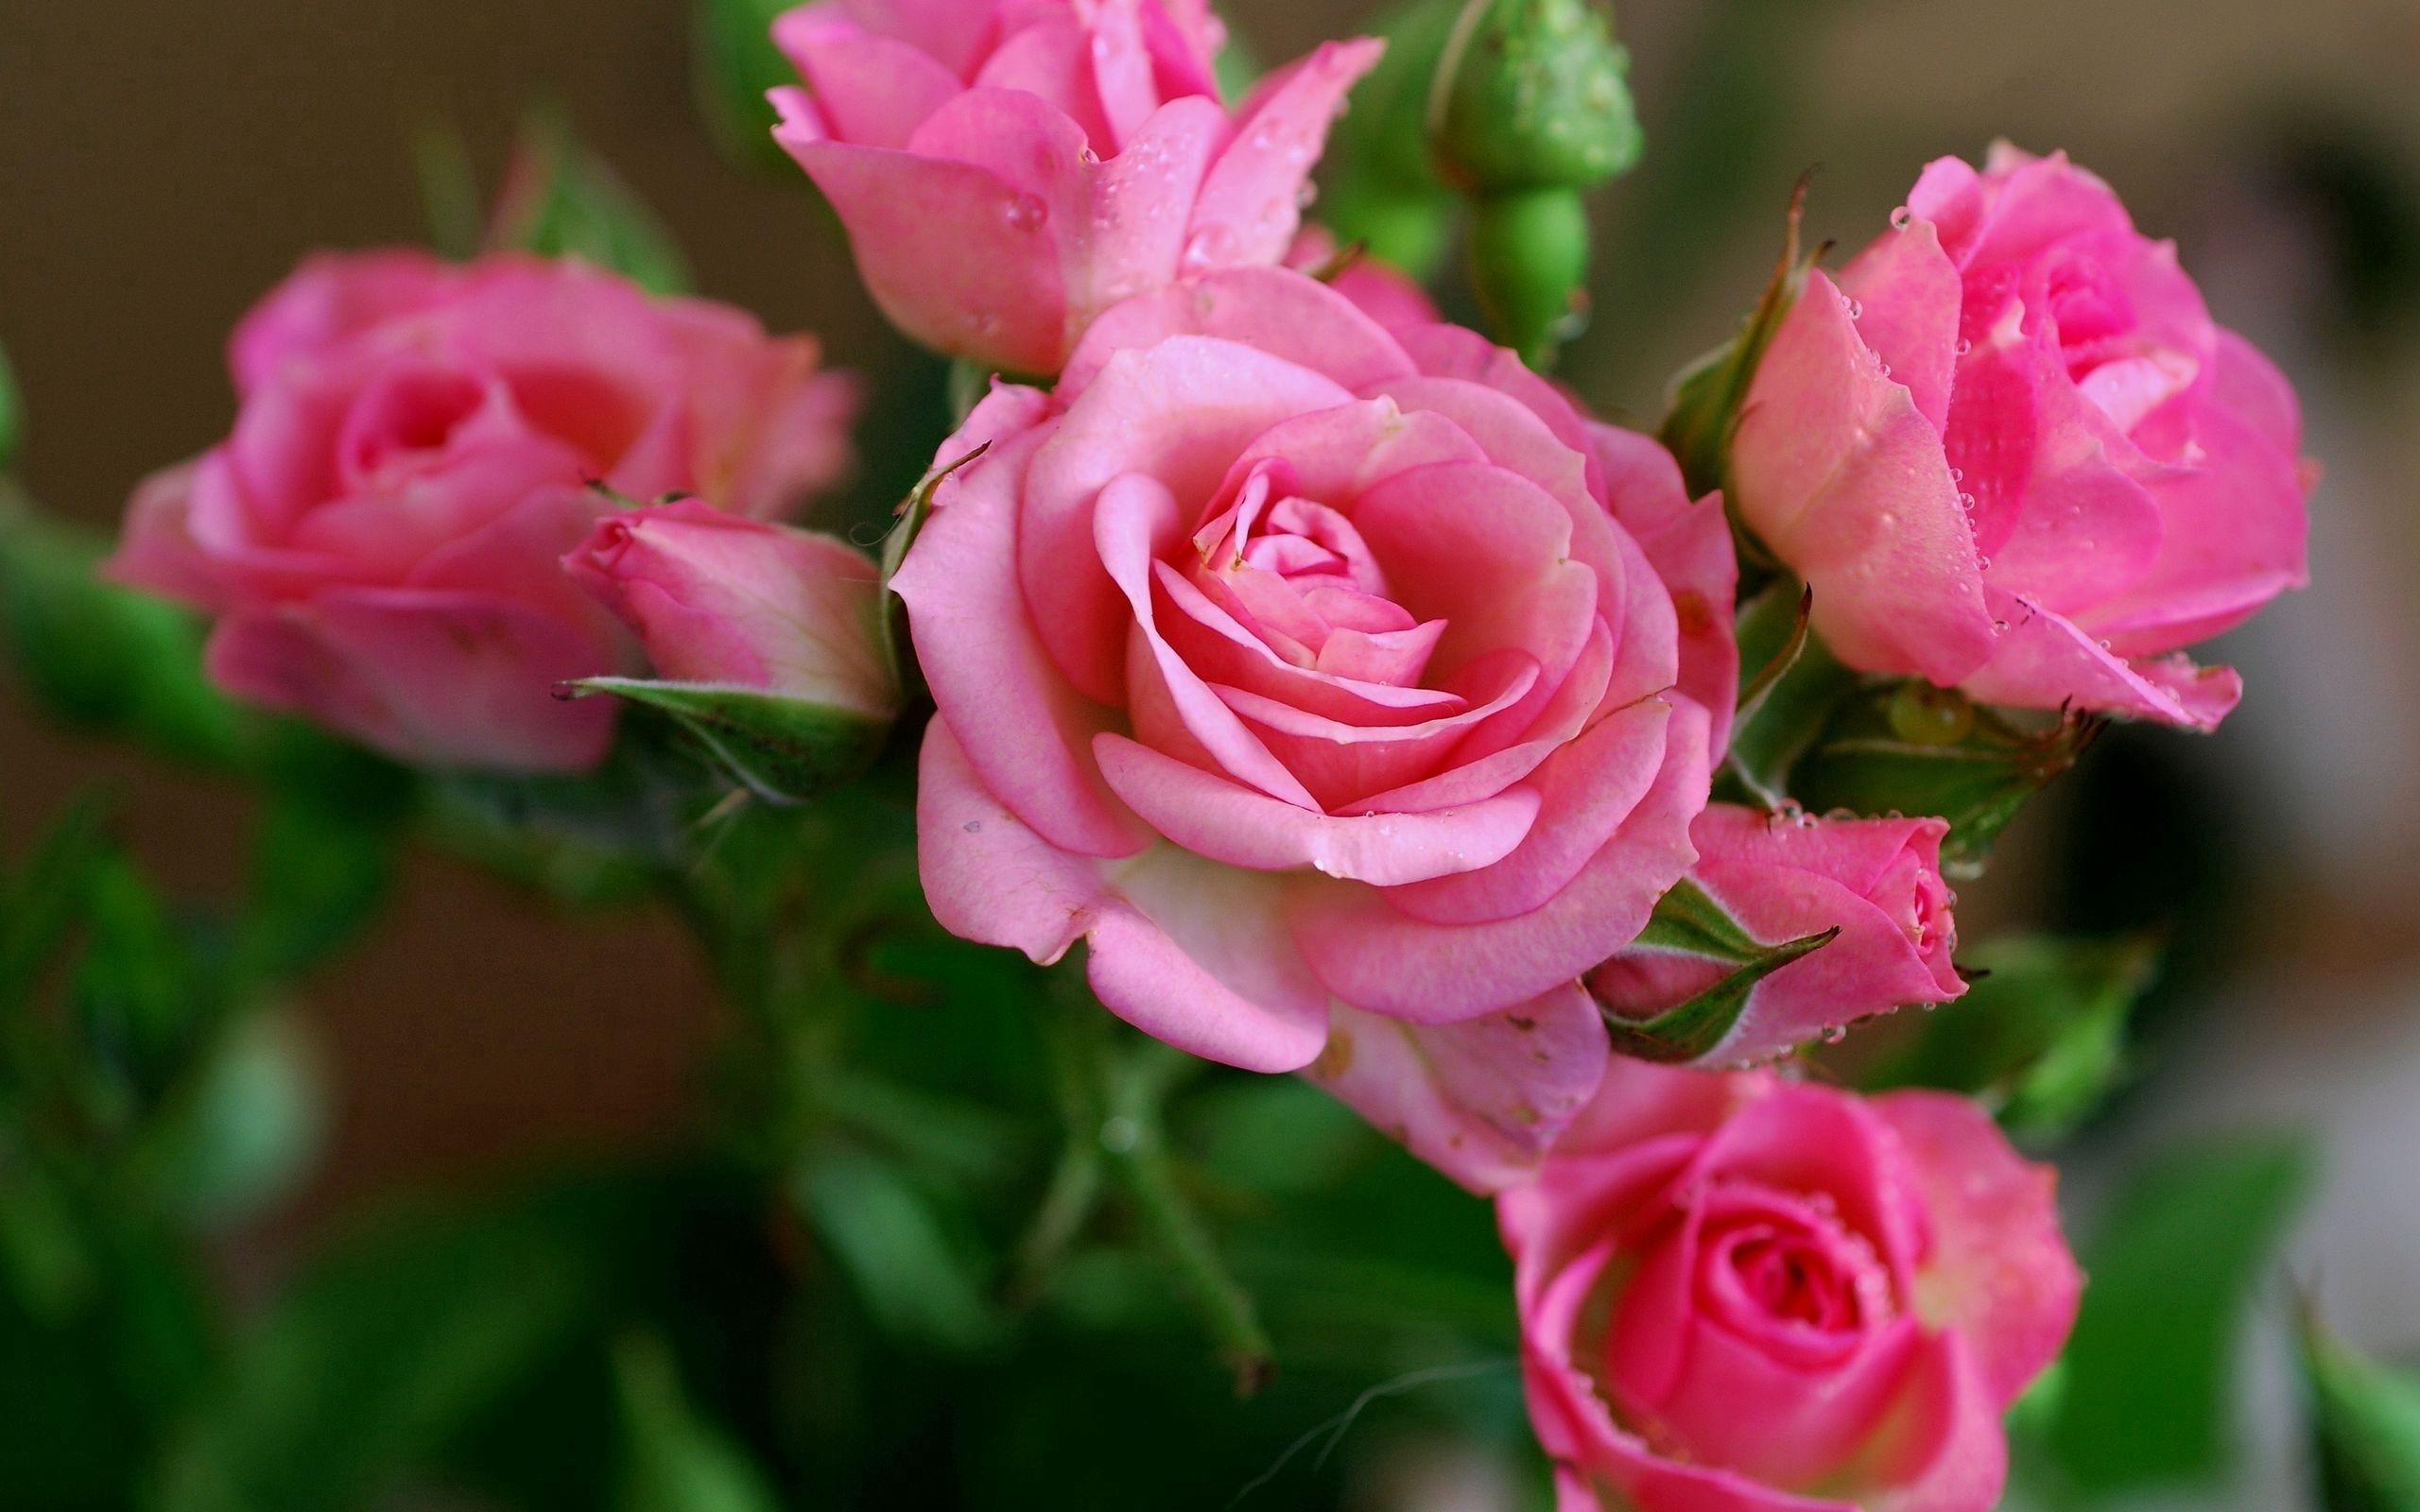 roses, buds, flowers, drops, dew Full HD